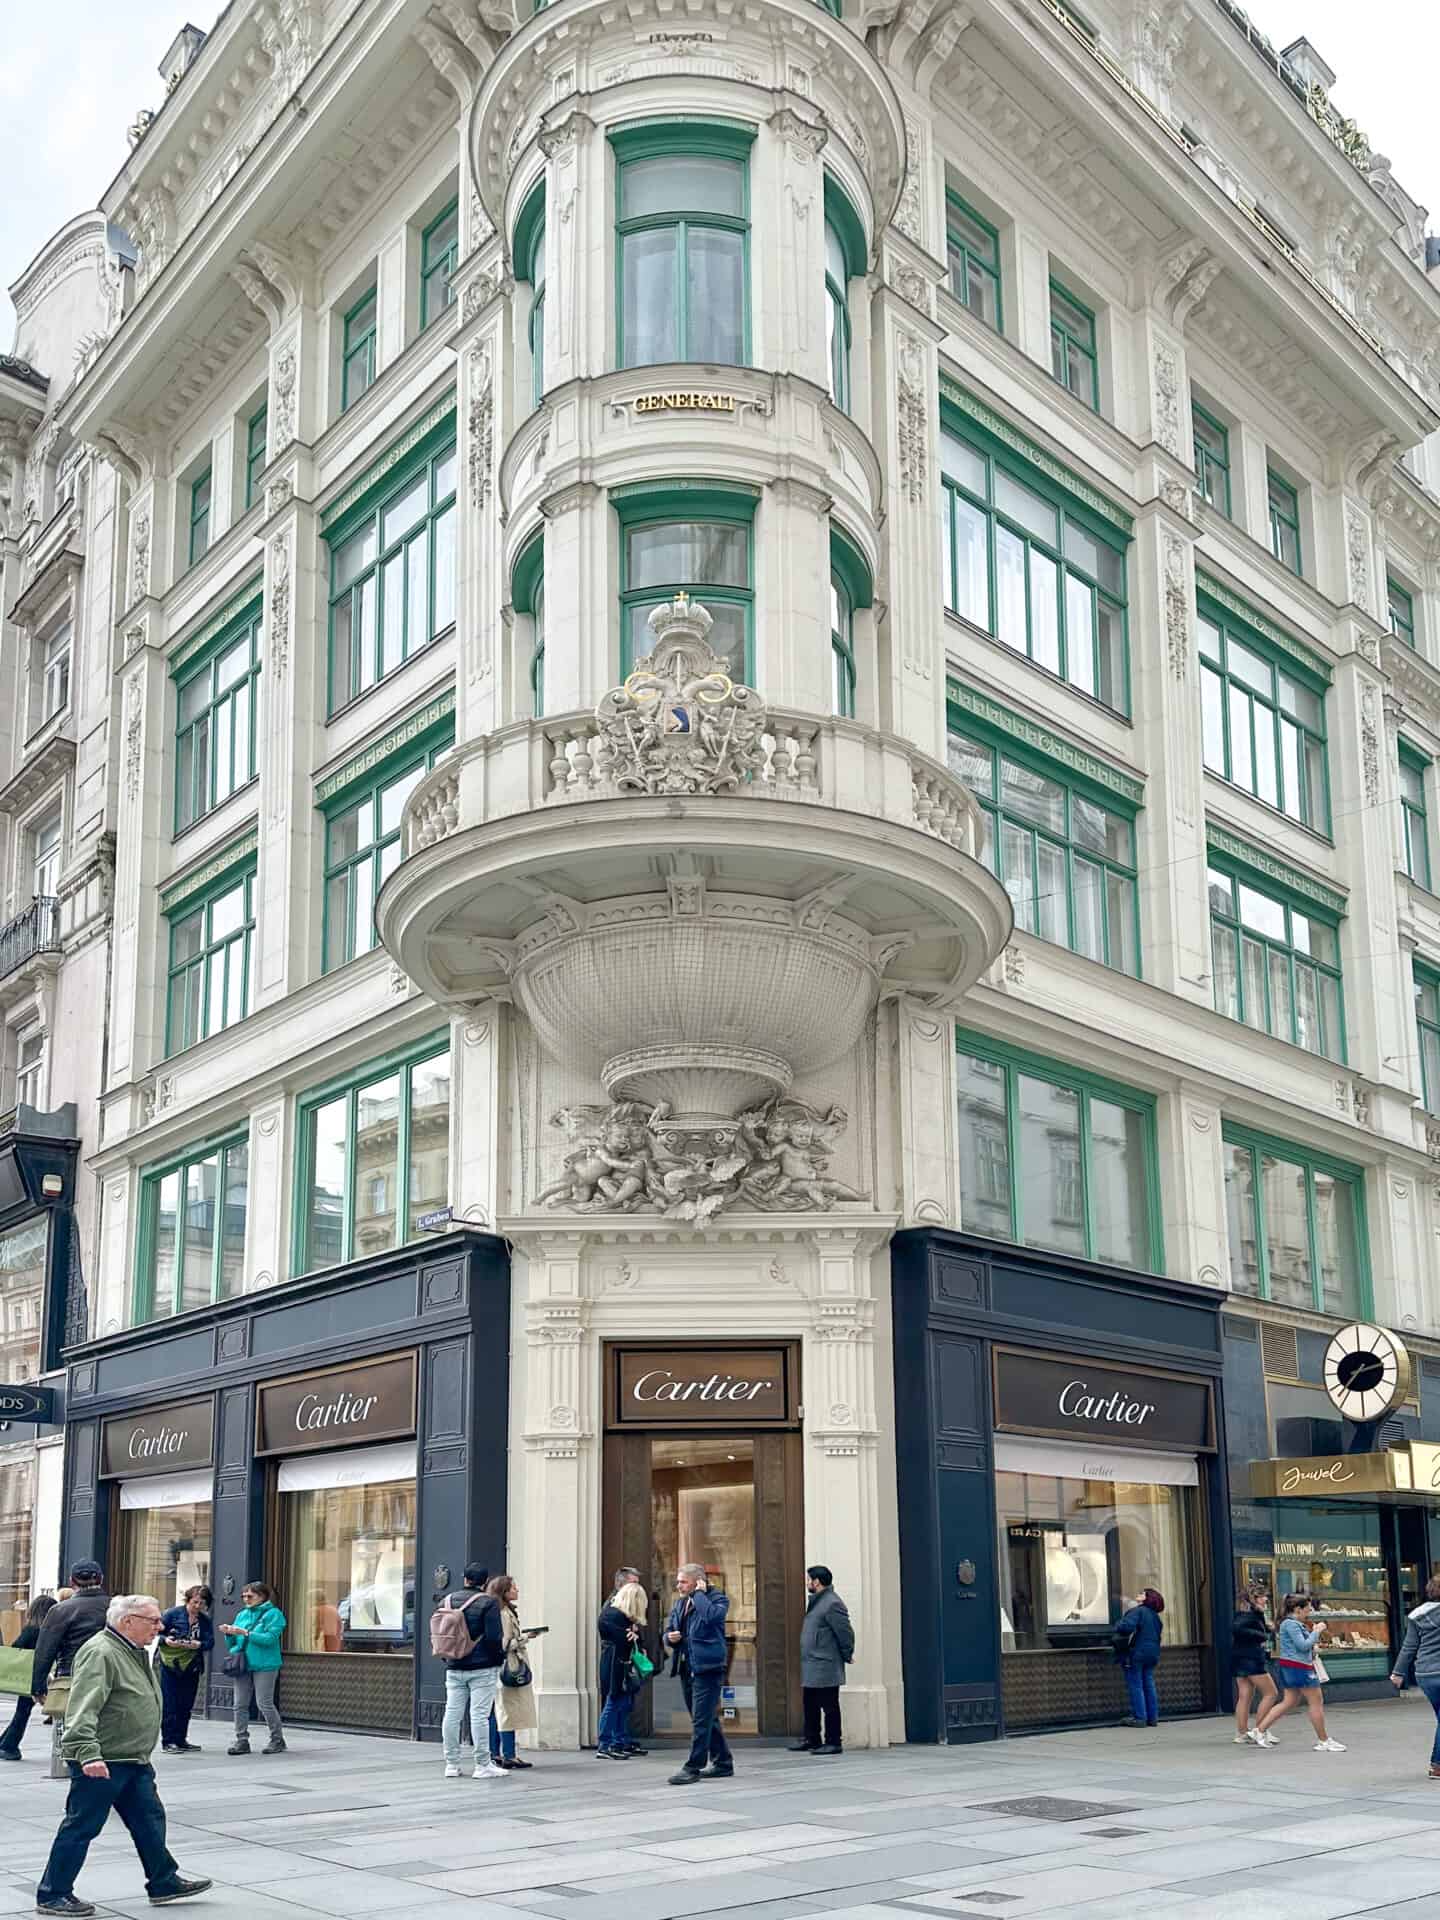 What luxury stores does vienna have